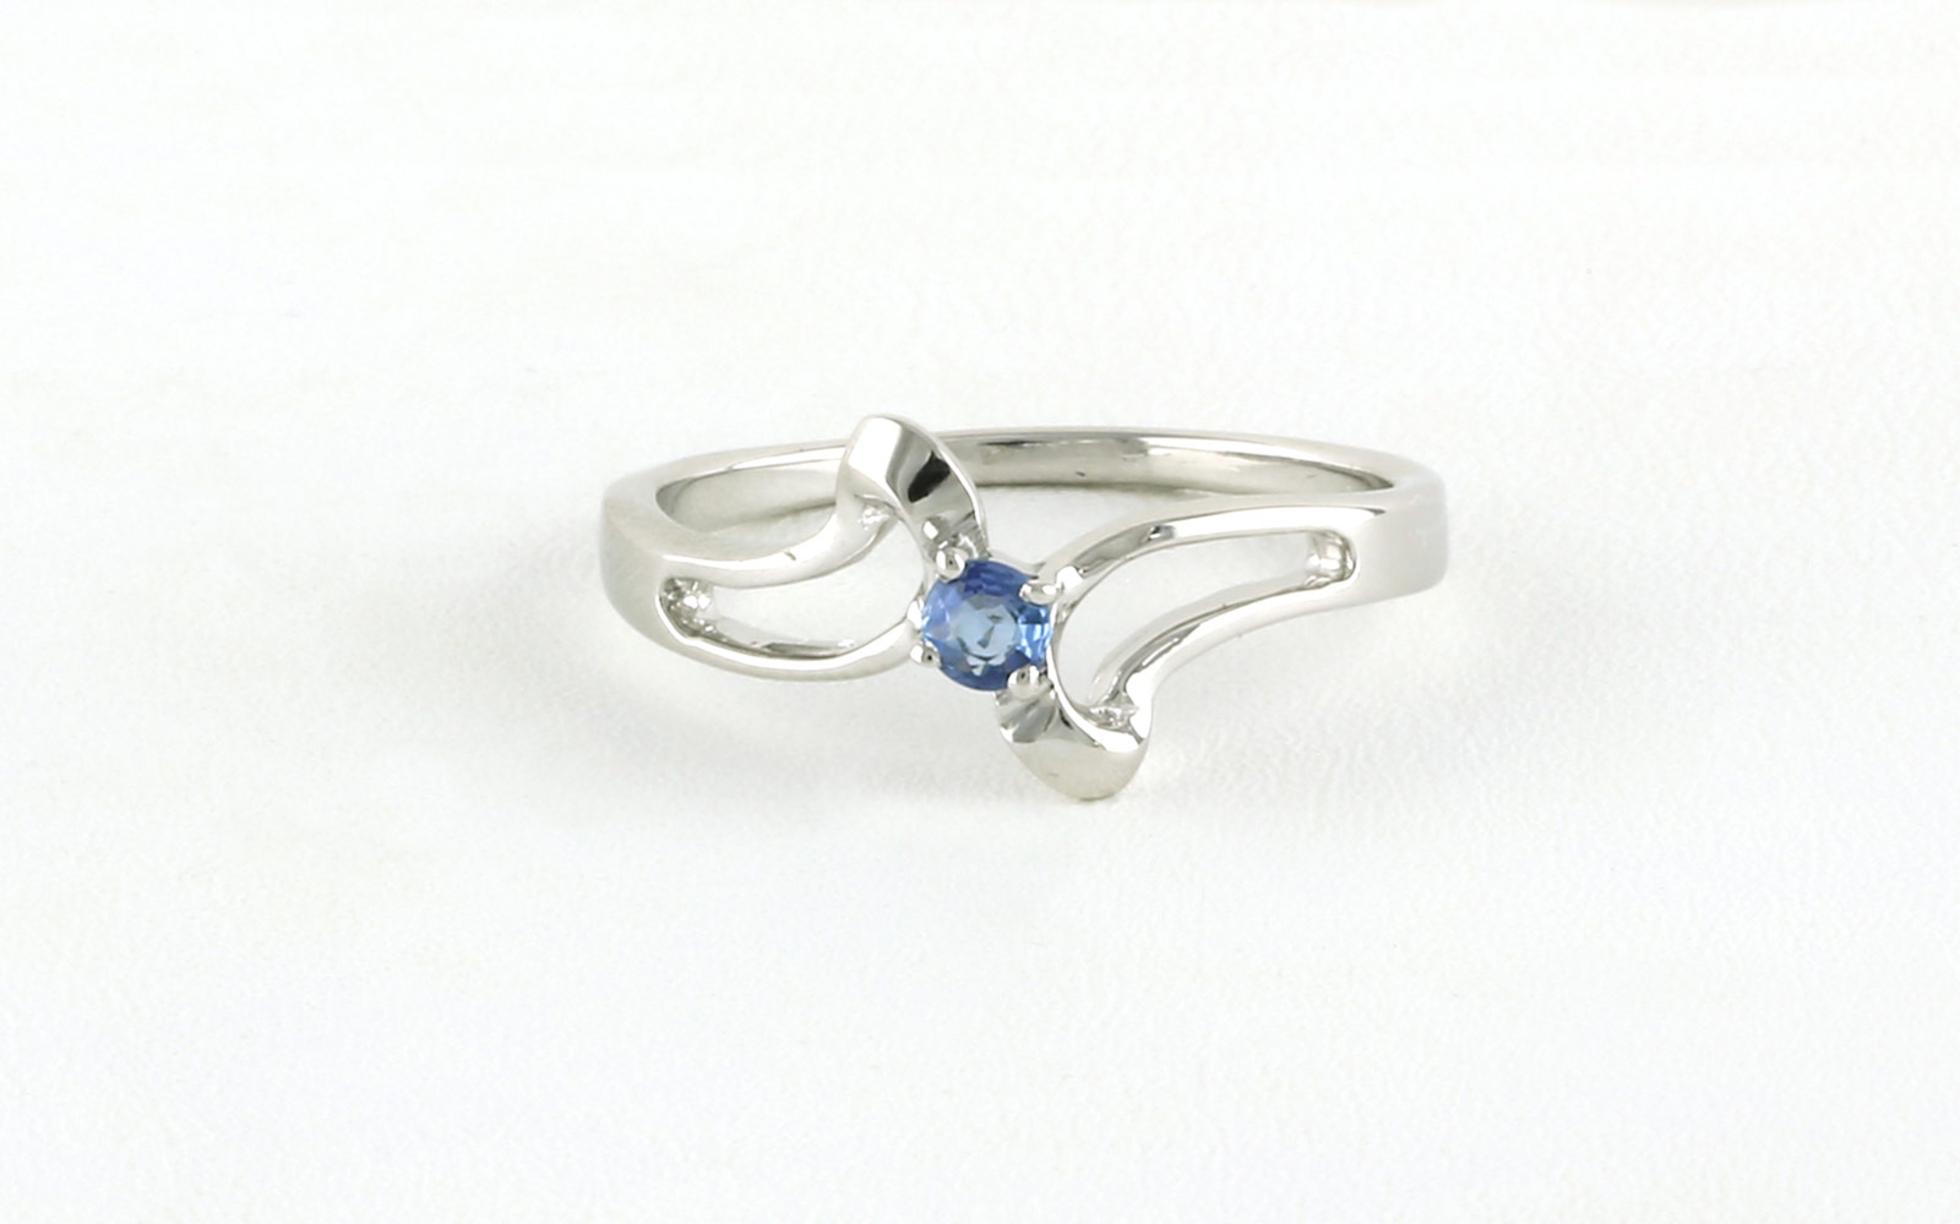 Swirl Montana Yogo Sapphire Ring in Sterling Silver (0.09cts)